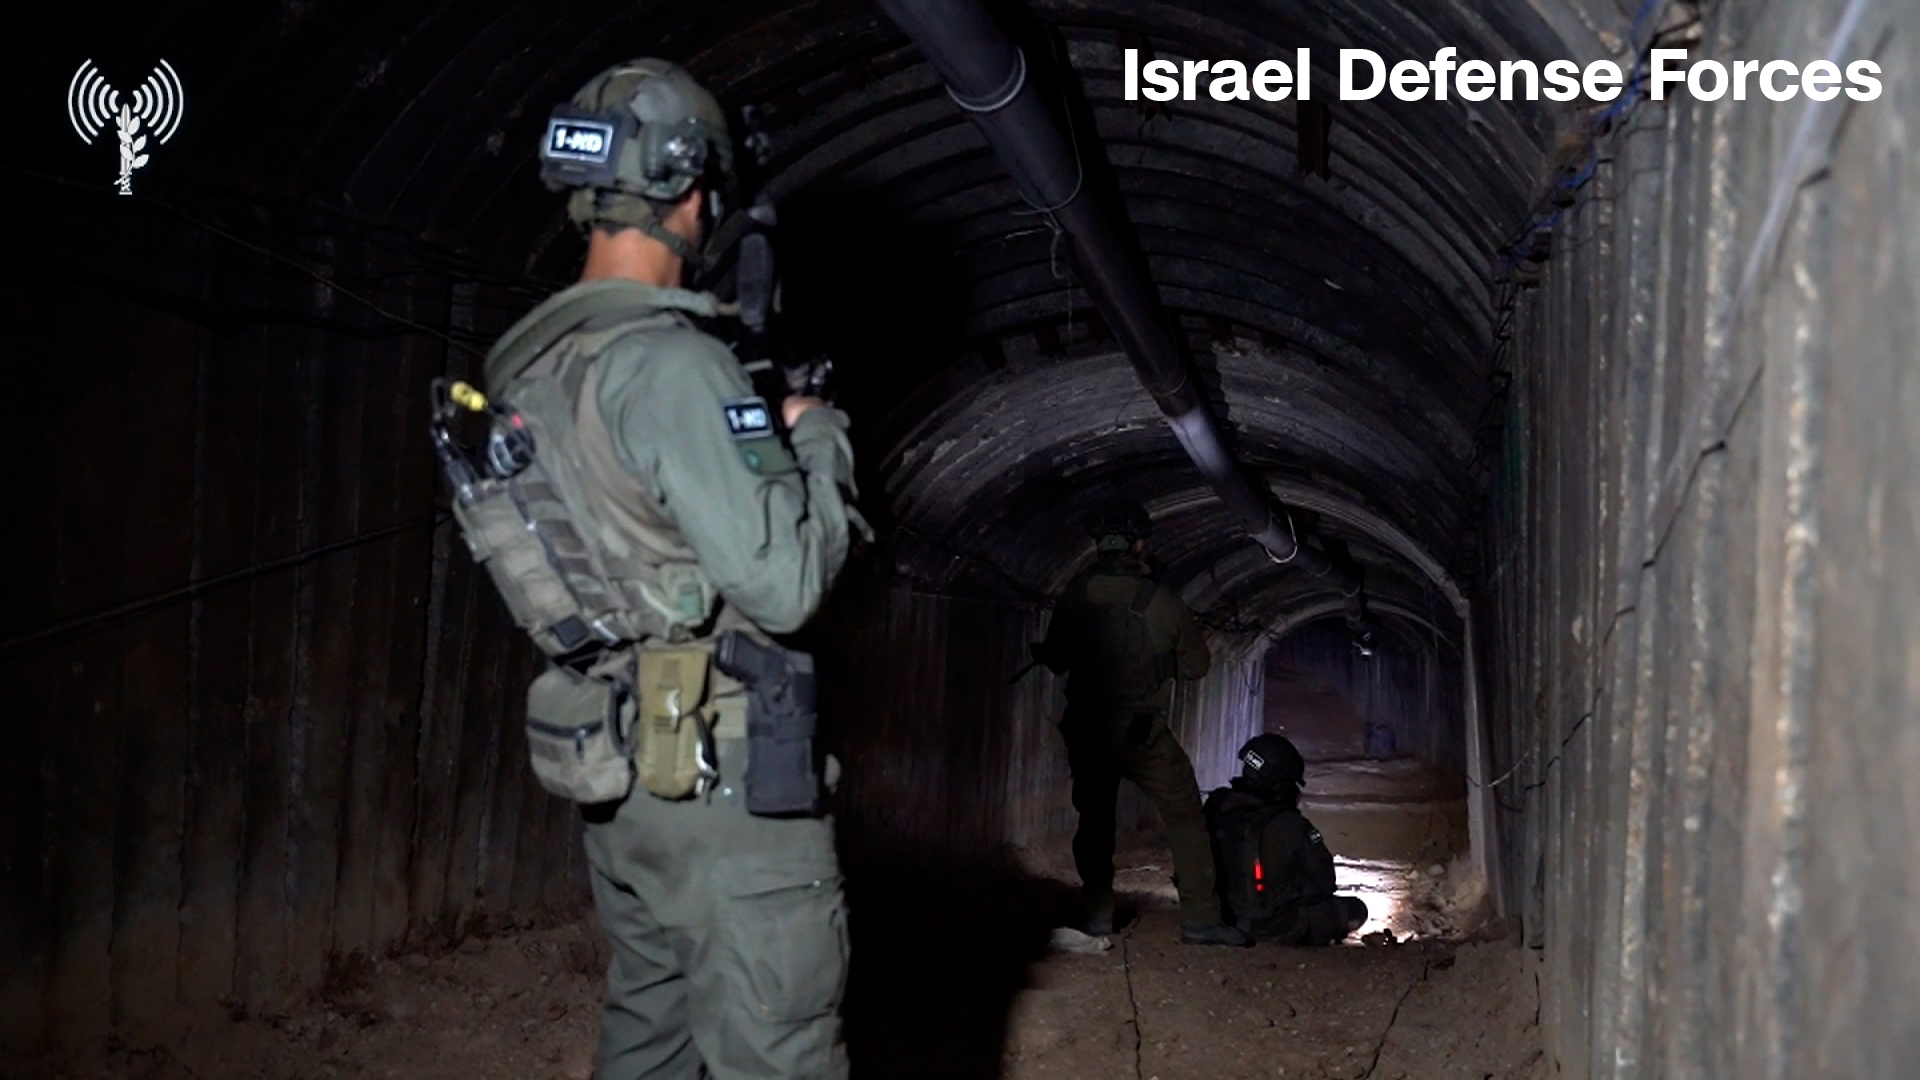 Israel Defense Forces soldiers gain access to a Hamas tunnel in Gaza in this screengrab from an undated video released by the IDF.